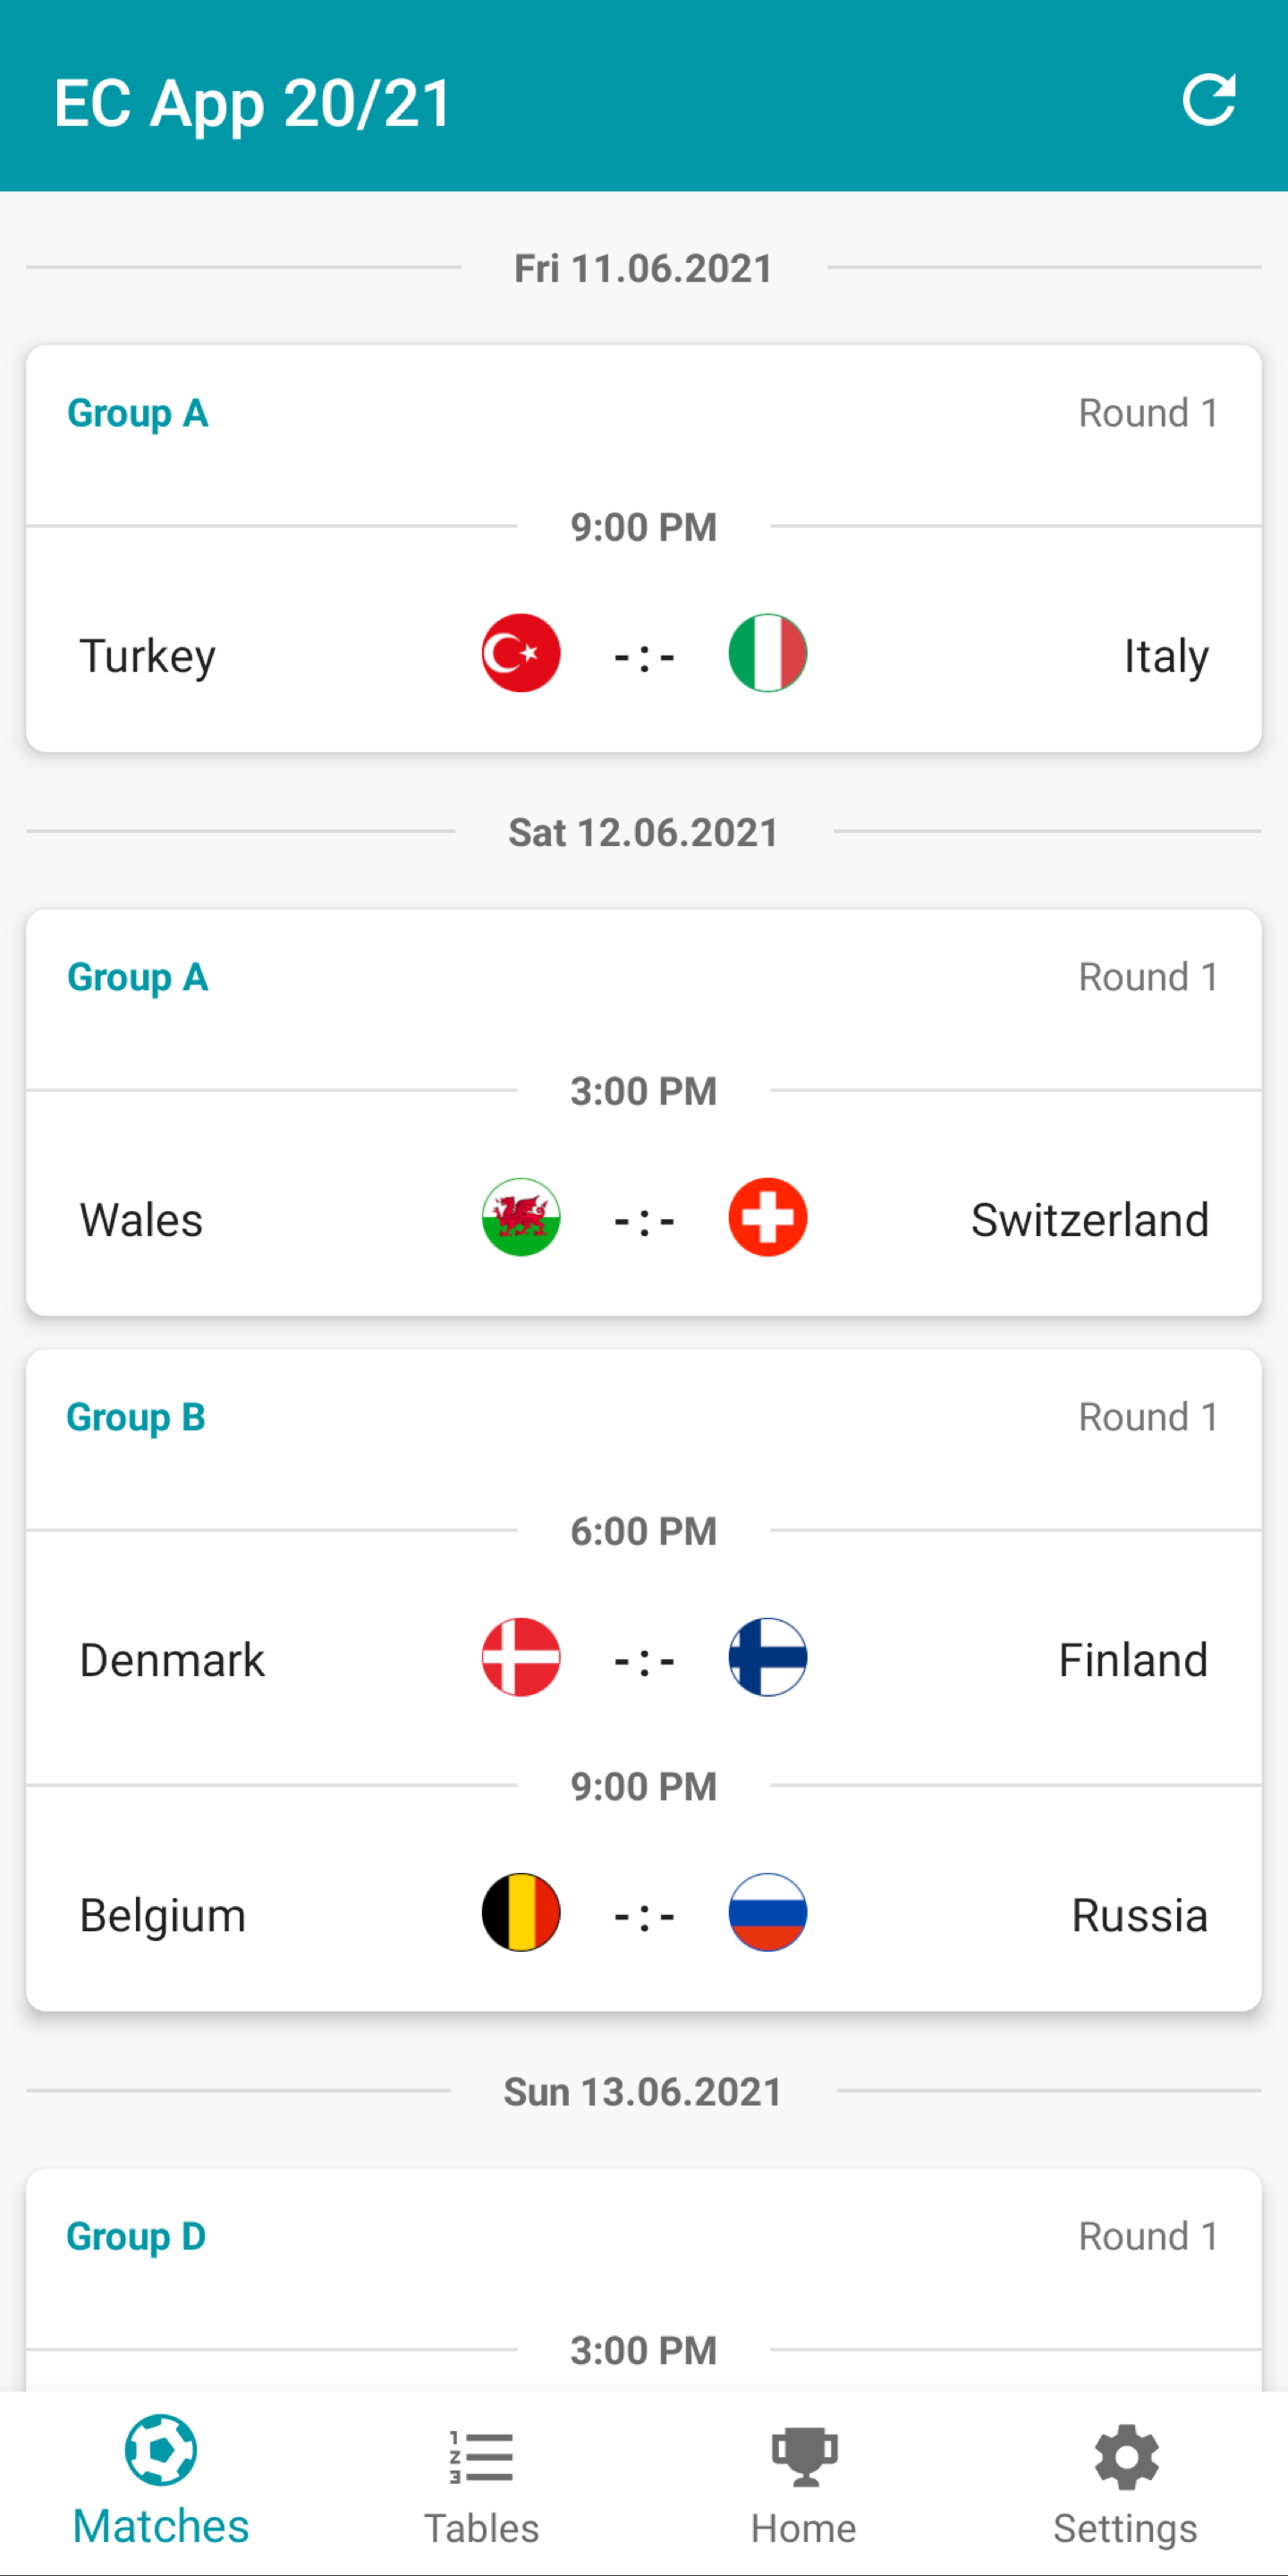 Android application Euro Football App 2020 in 2021 - Live Scores screenshort